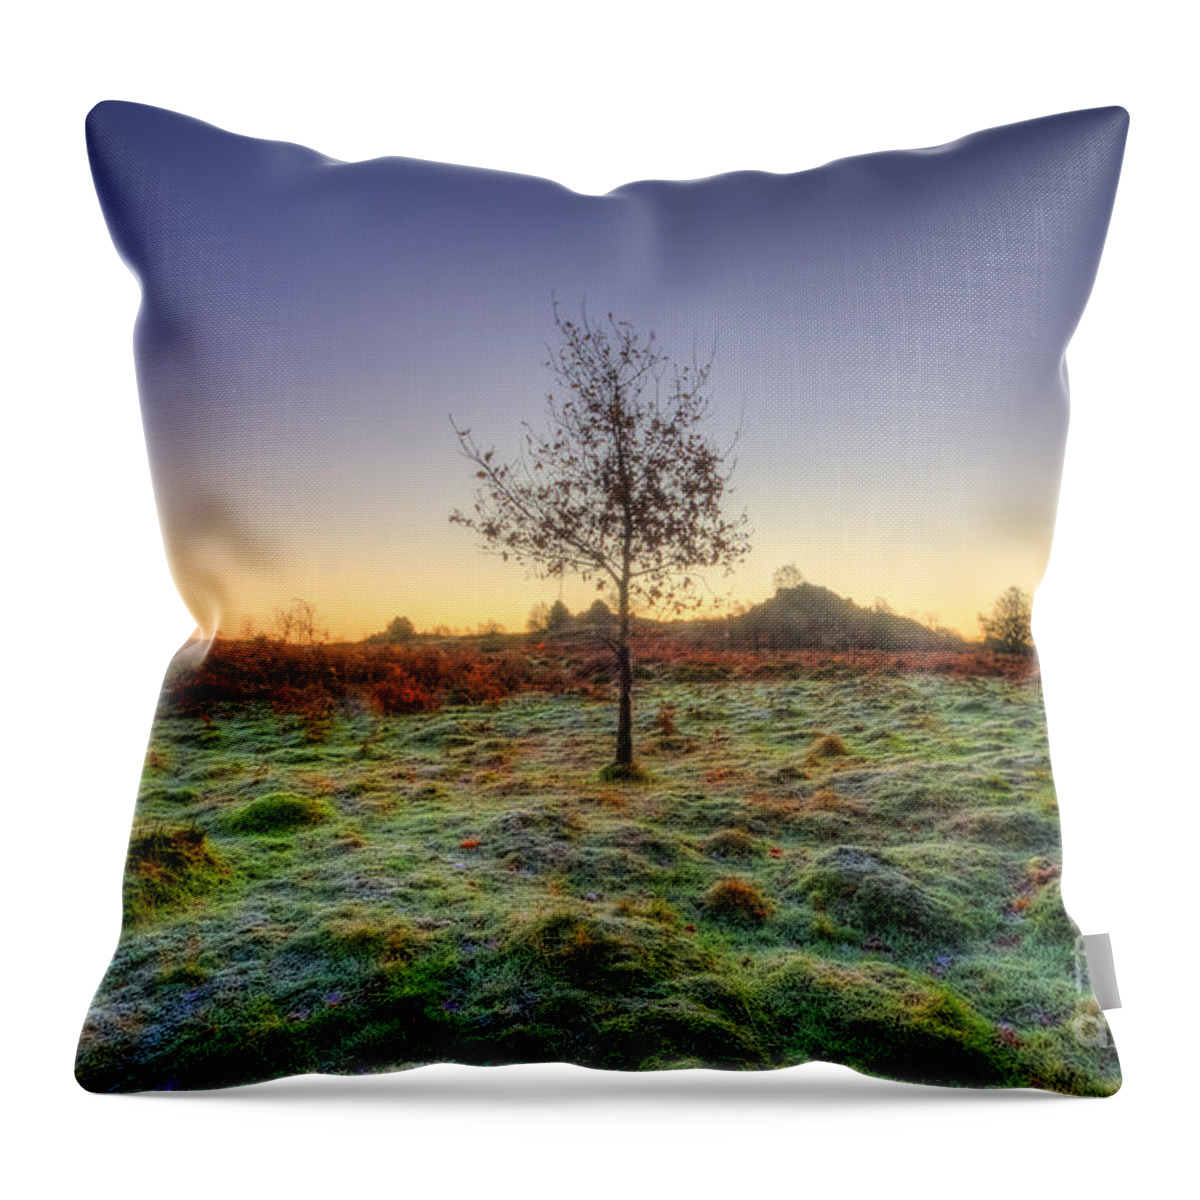 Hdr Throw Pillow featuring the photograph Colours Of Dawn by Yhun Suarez